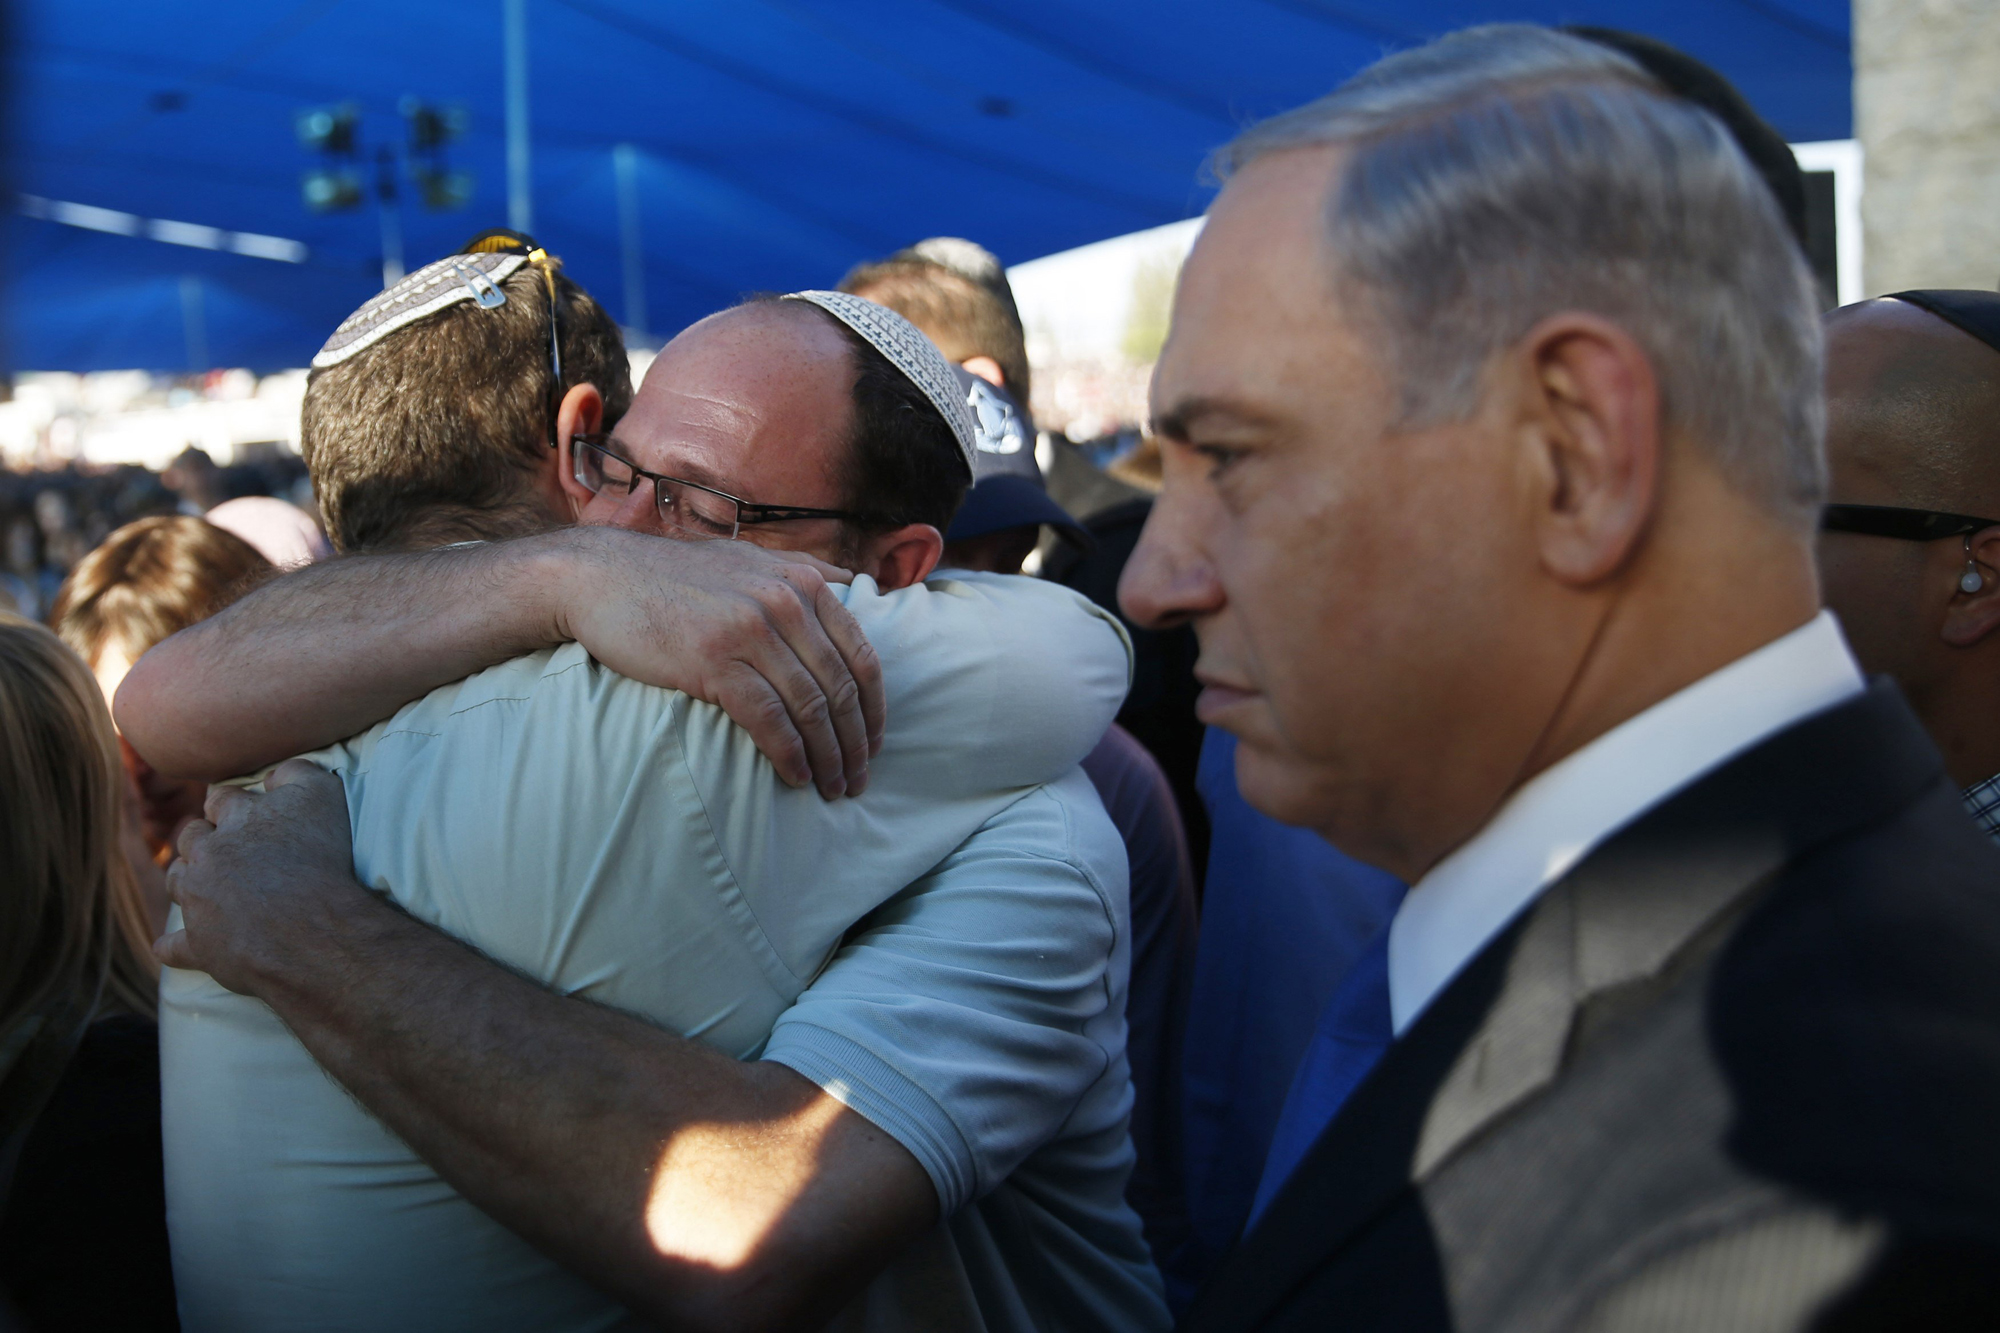 Israeli Prime Minister Benjamin Netanyahu stands next to Avi Fraenkel and Ofir Shaer, fathers of two of the three Israeli teens who were abducted and killed in the occupied West Bank, as they hug during their sons' joint funeral in the Israeli city of Modi'in July 1.